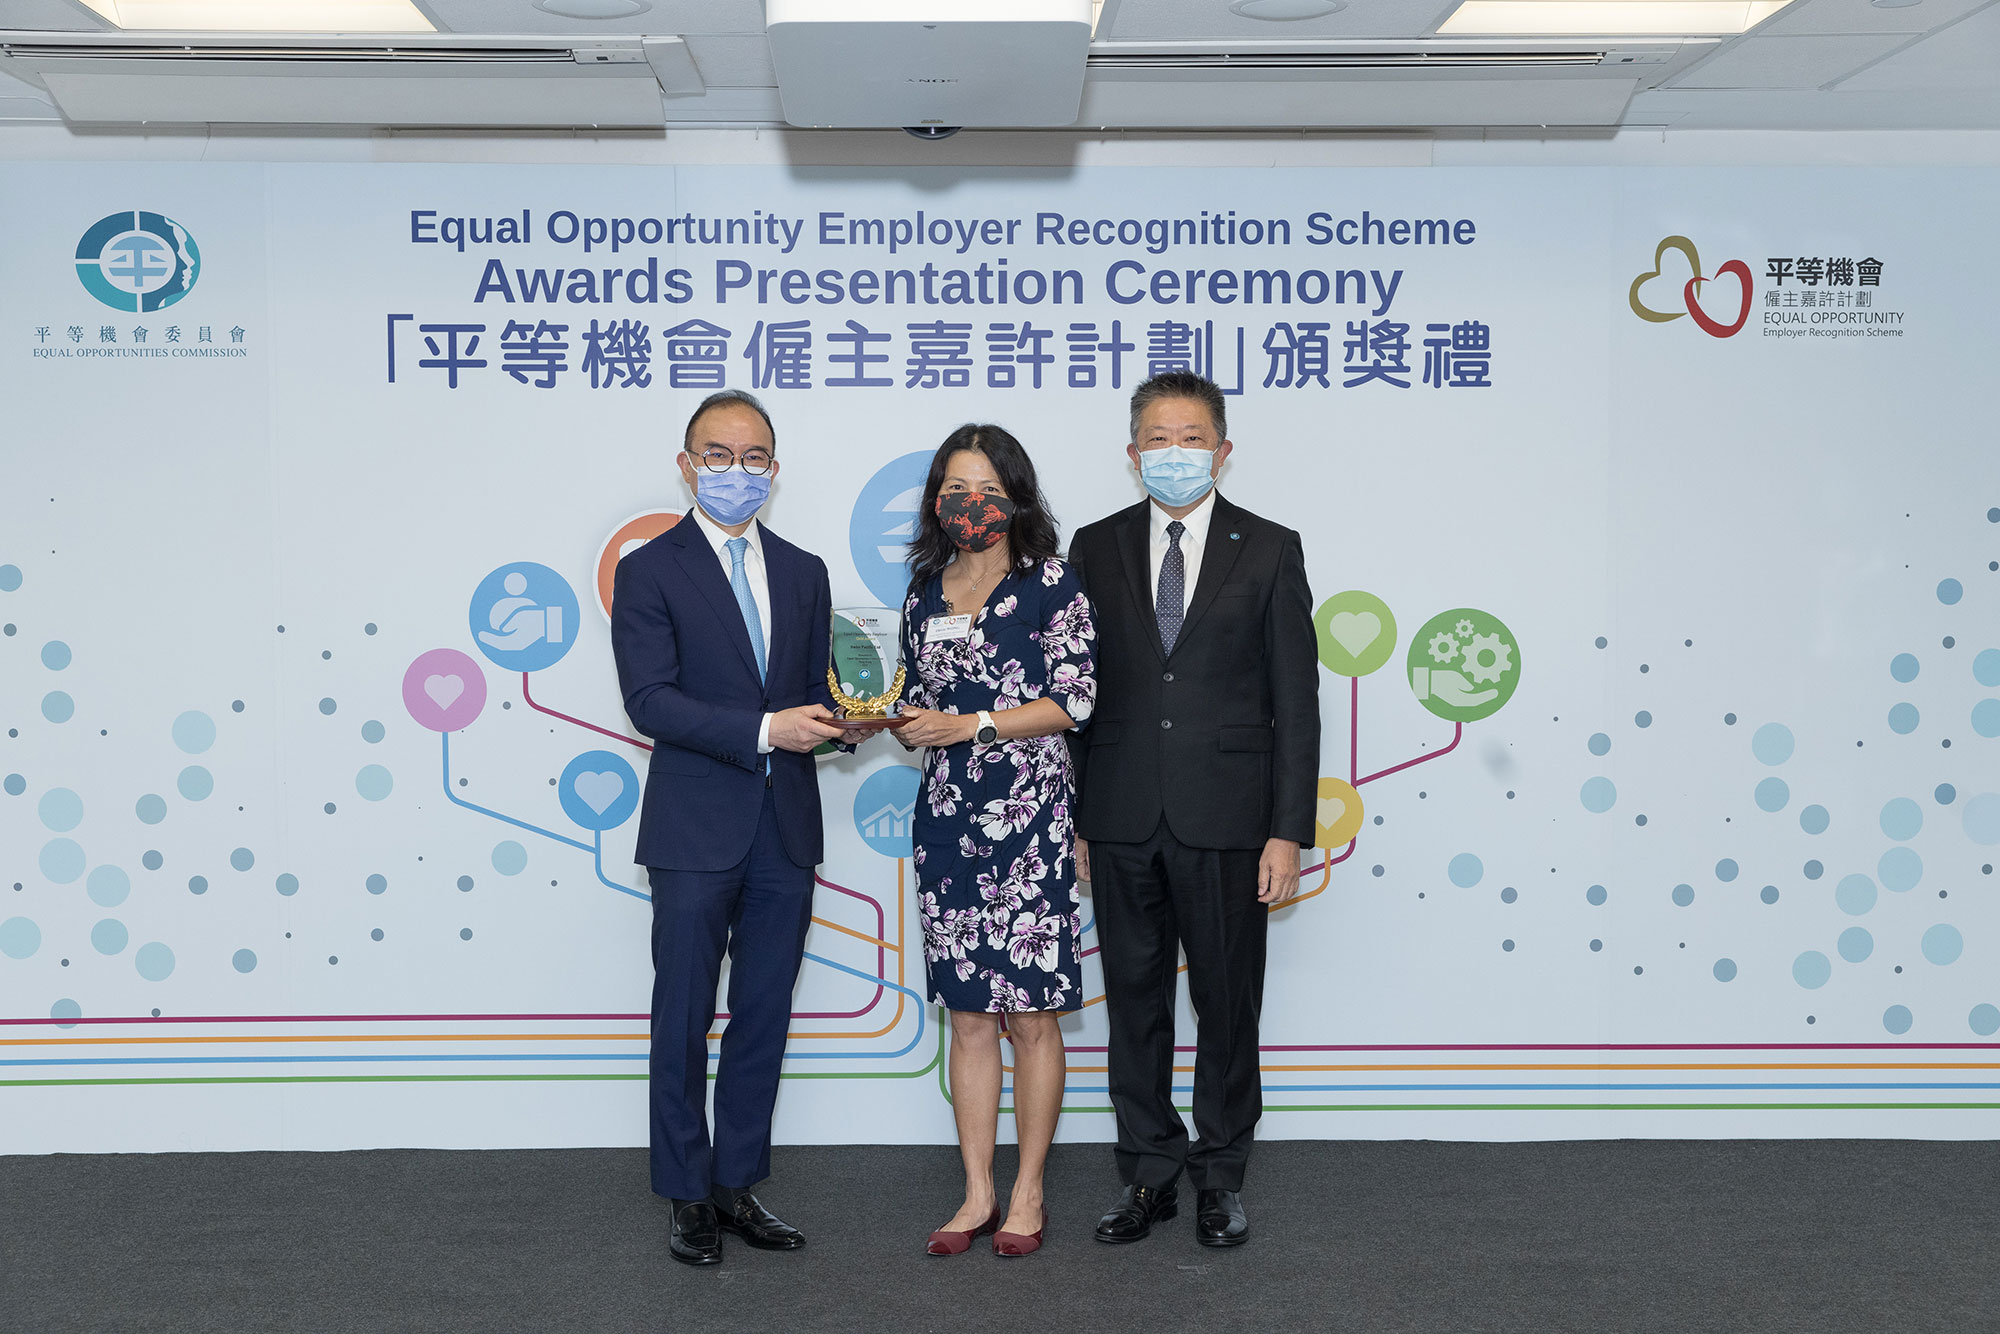 Mr Erick TSANG Kwok-wai, IDSM, JP, Secretary for Constitutional and Mainland Affairs (left) and Mr Ricky CHU Man-kin, IDS, Chairperson of the Equal Opportunities Commission (right), present the trophy to the representative of Swire Pacific Ltd (centre), winner of the Gold Award of the Equal Opportunity Employer Recognition Scheme.